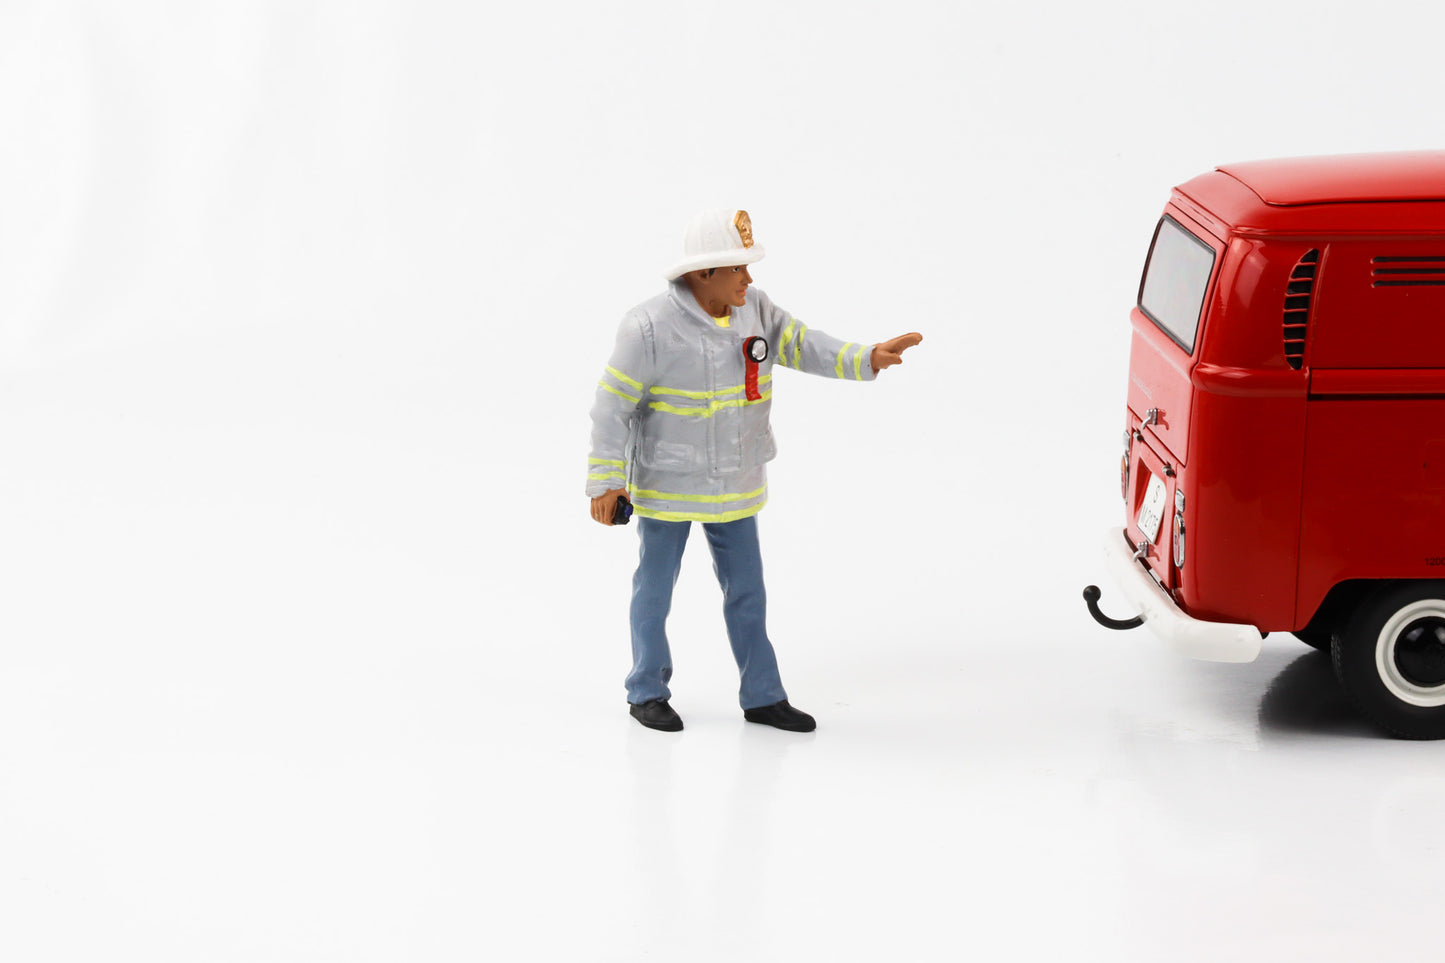 1:18 Figure Fire Department Firefighters Captain Chief Gray Suit American Diorama Figures